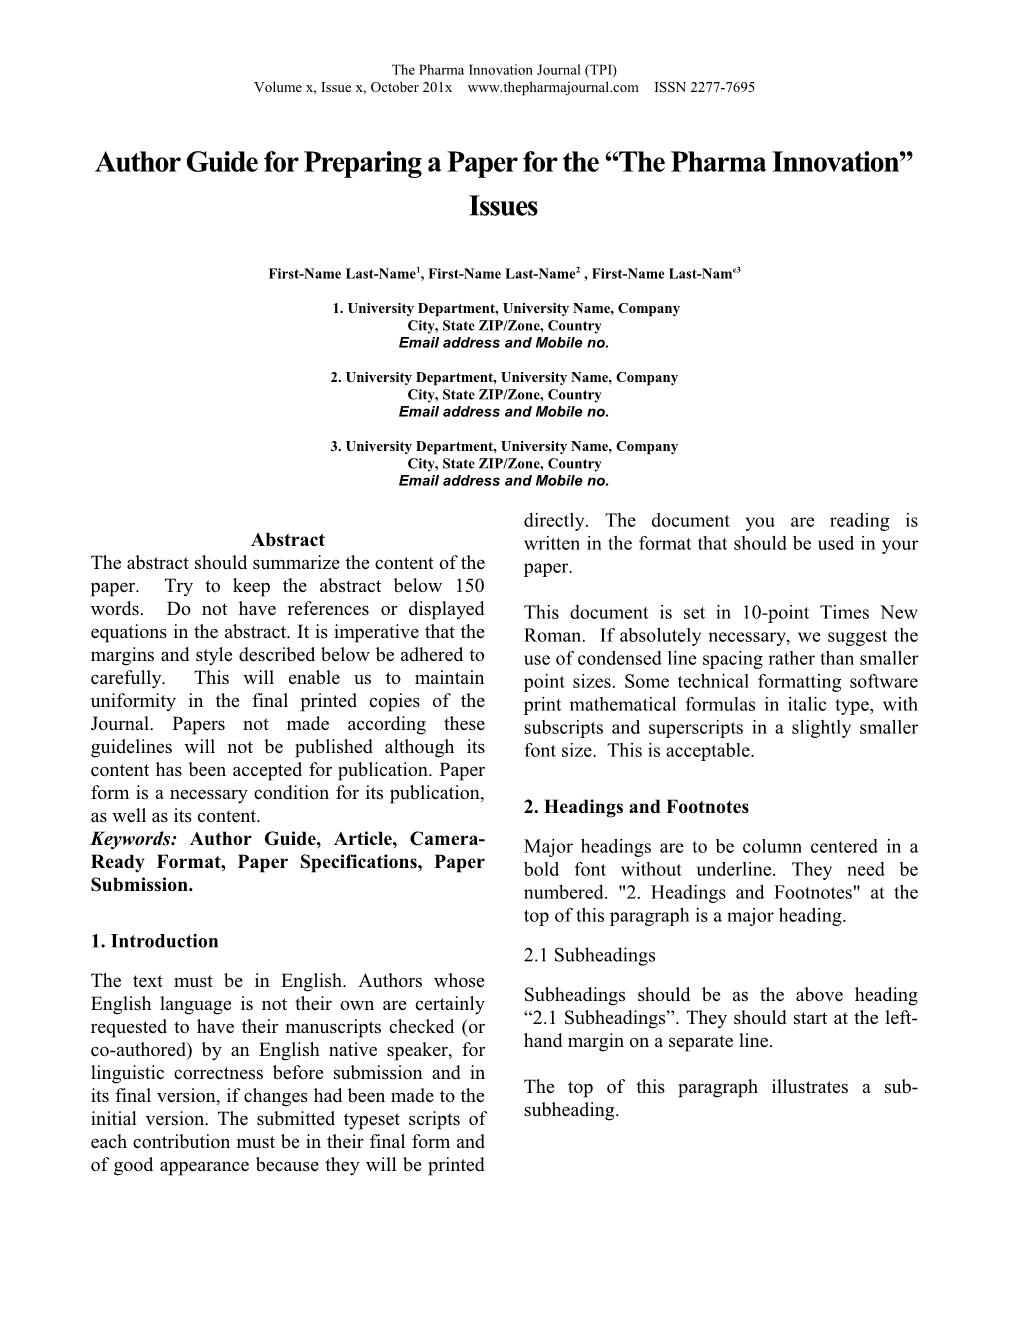 Author Guide for Preparing a Paper for the the Pharma Innovation Issues